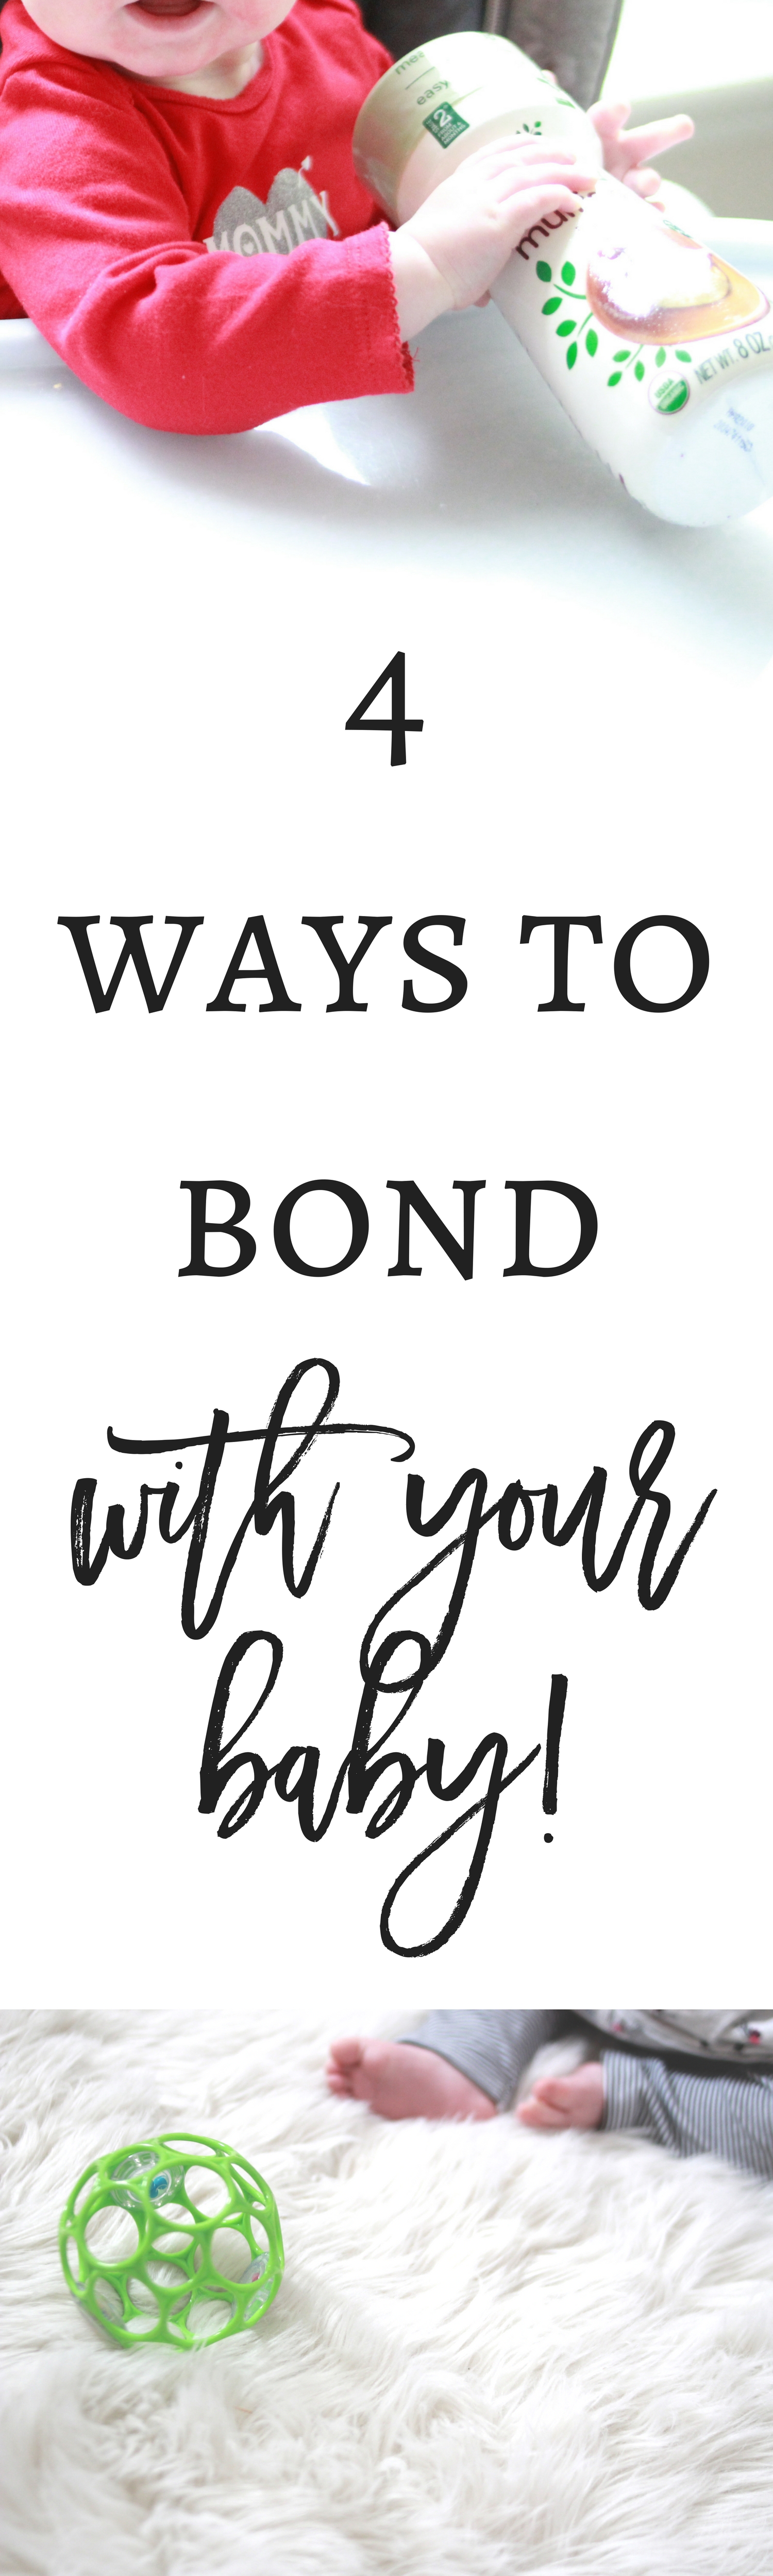 4 ways to bond with your baby